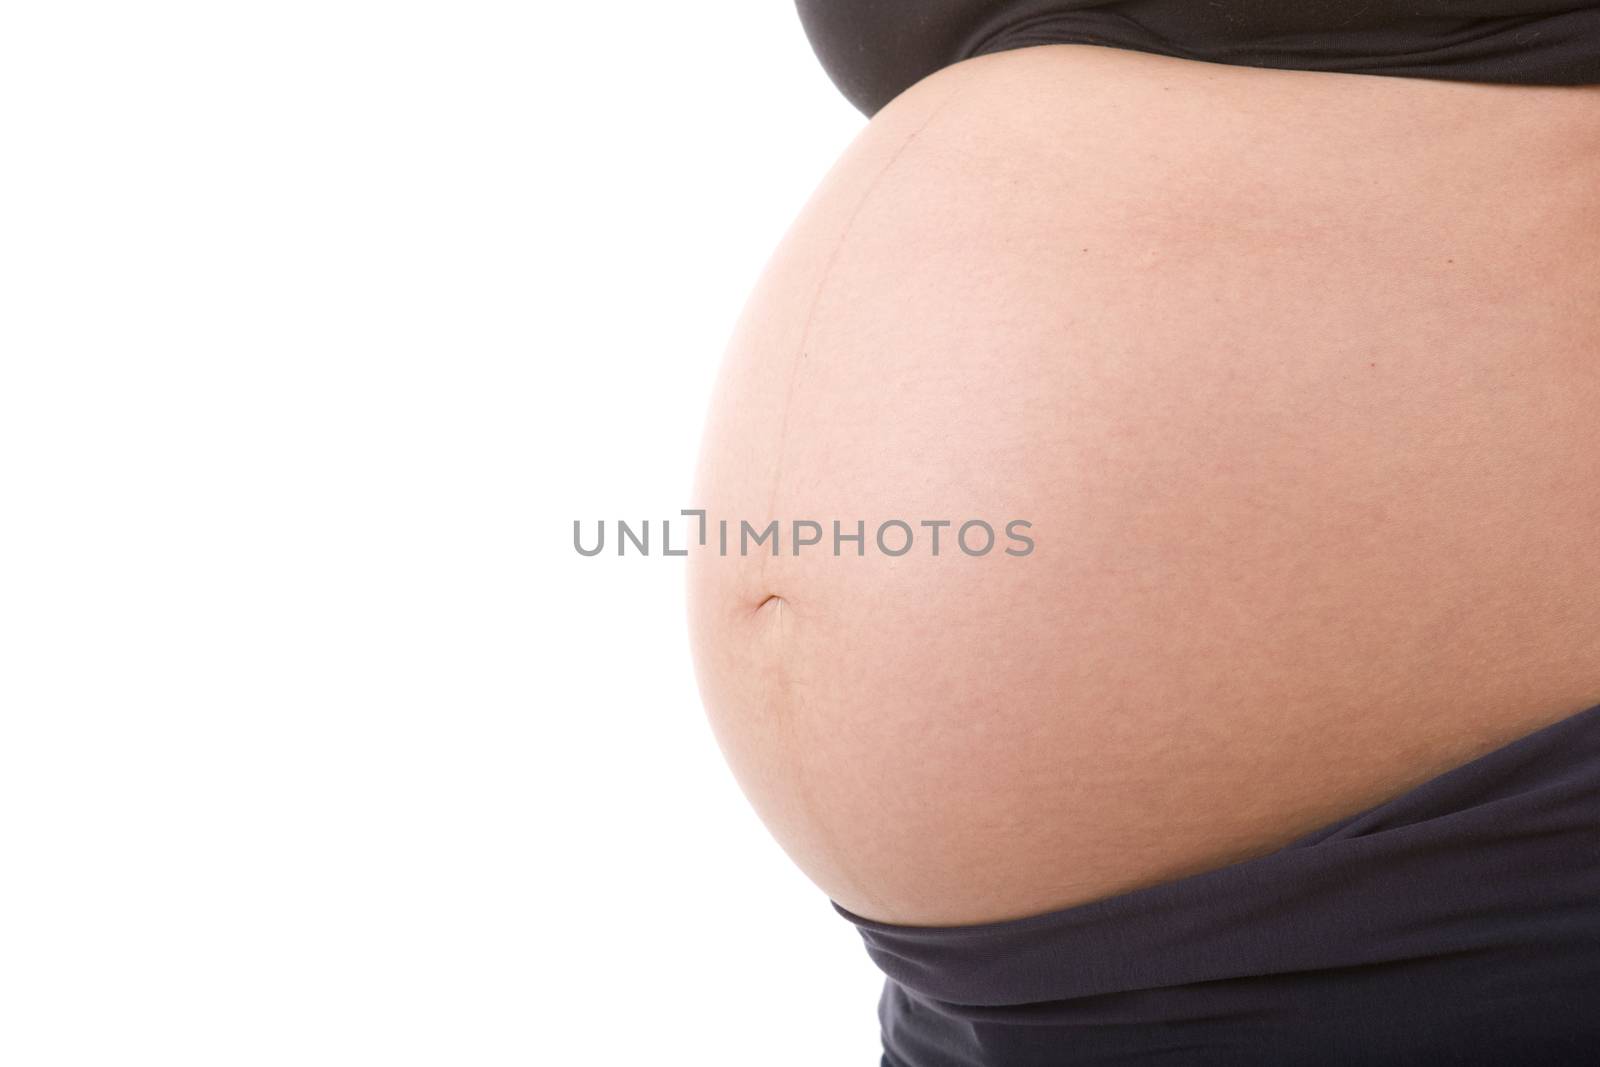 Closeup of pregnant woman at white background